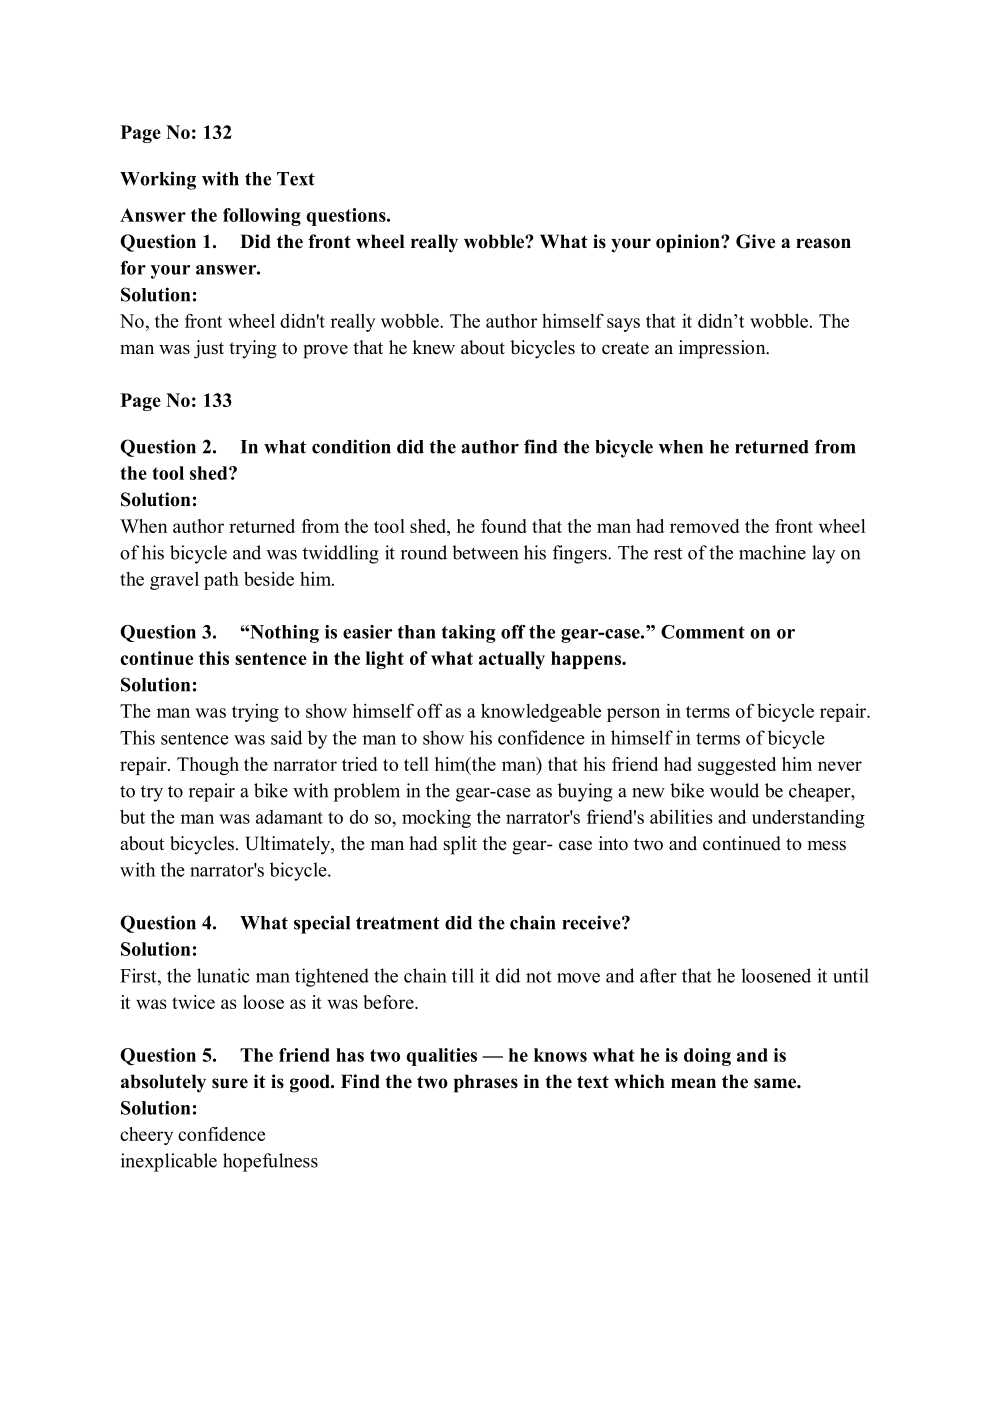 NCERT Solutions For Class 7 English Honeycomb Chapter 9 A Bicycle in Good Repair